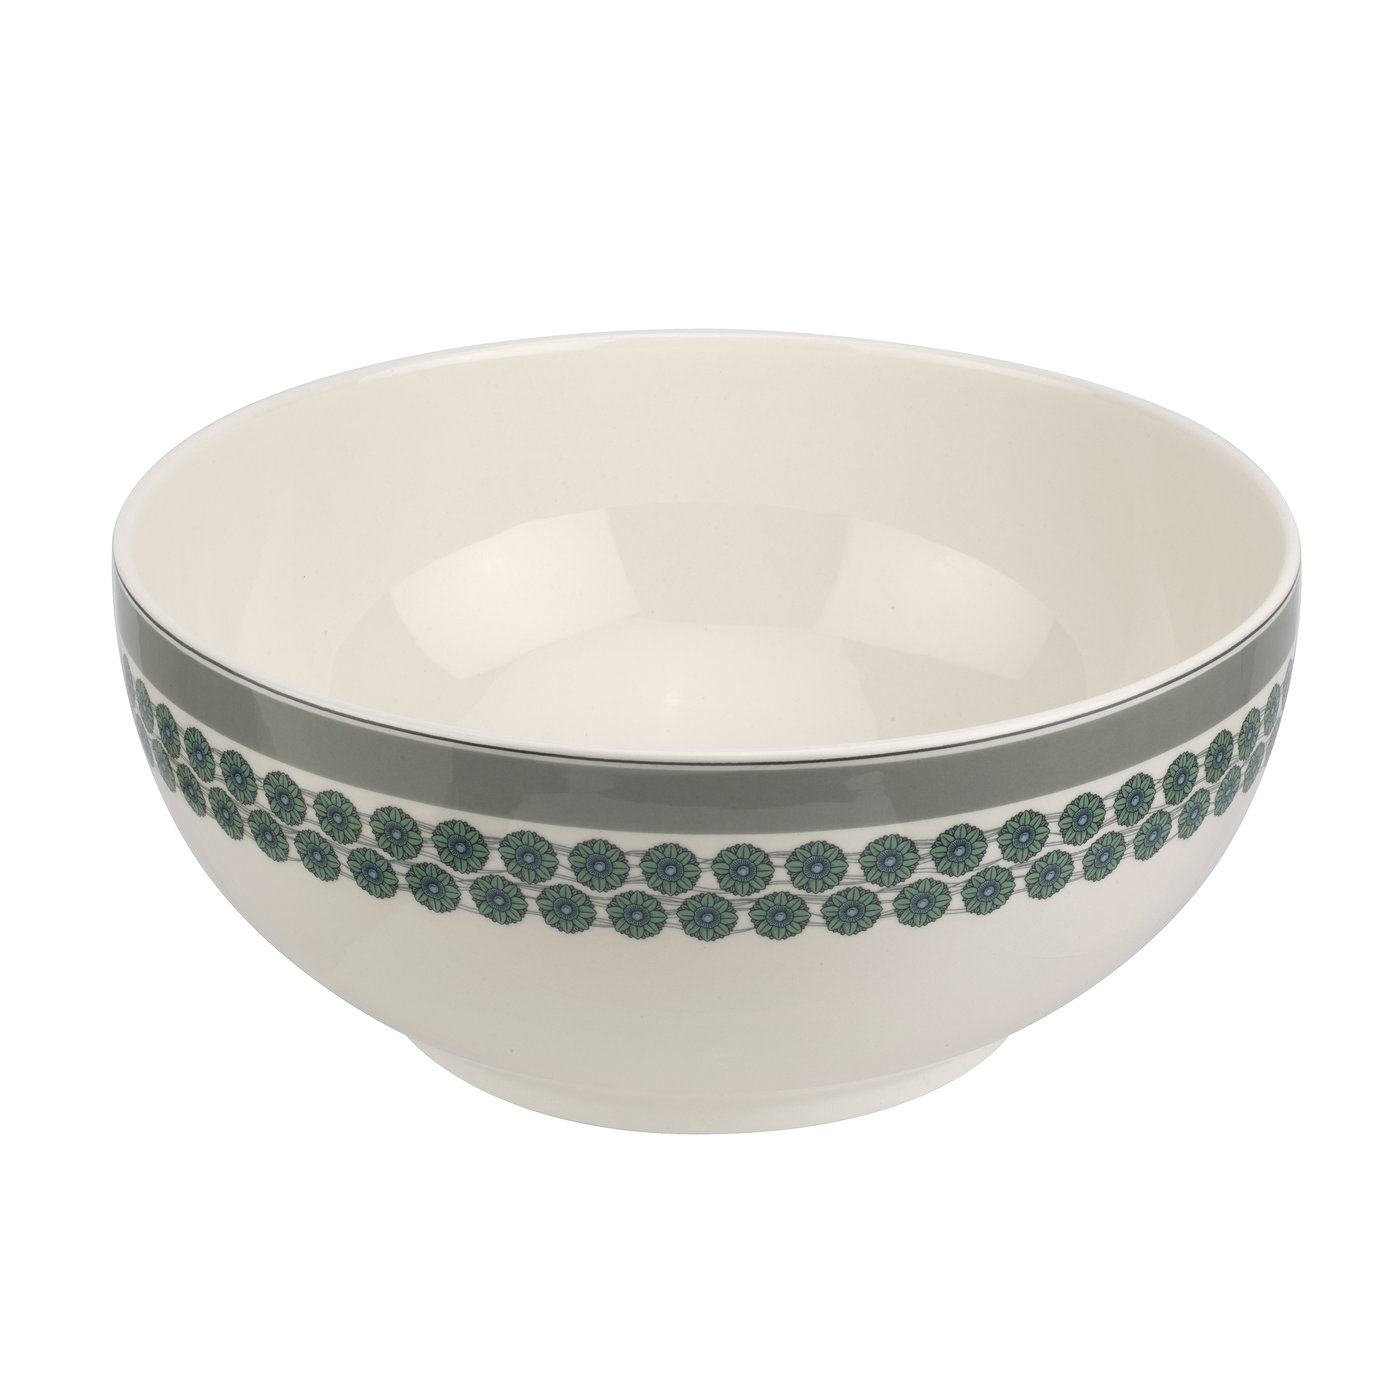 Westerly Grey 10.75 Inch Deep Bowl image number null